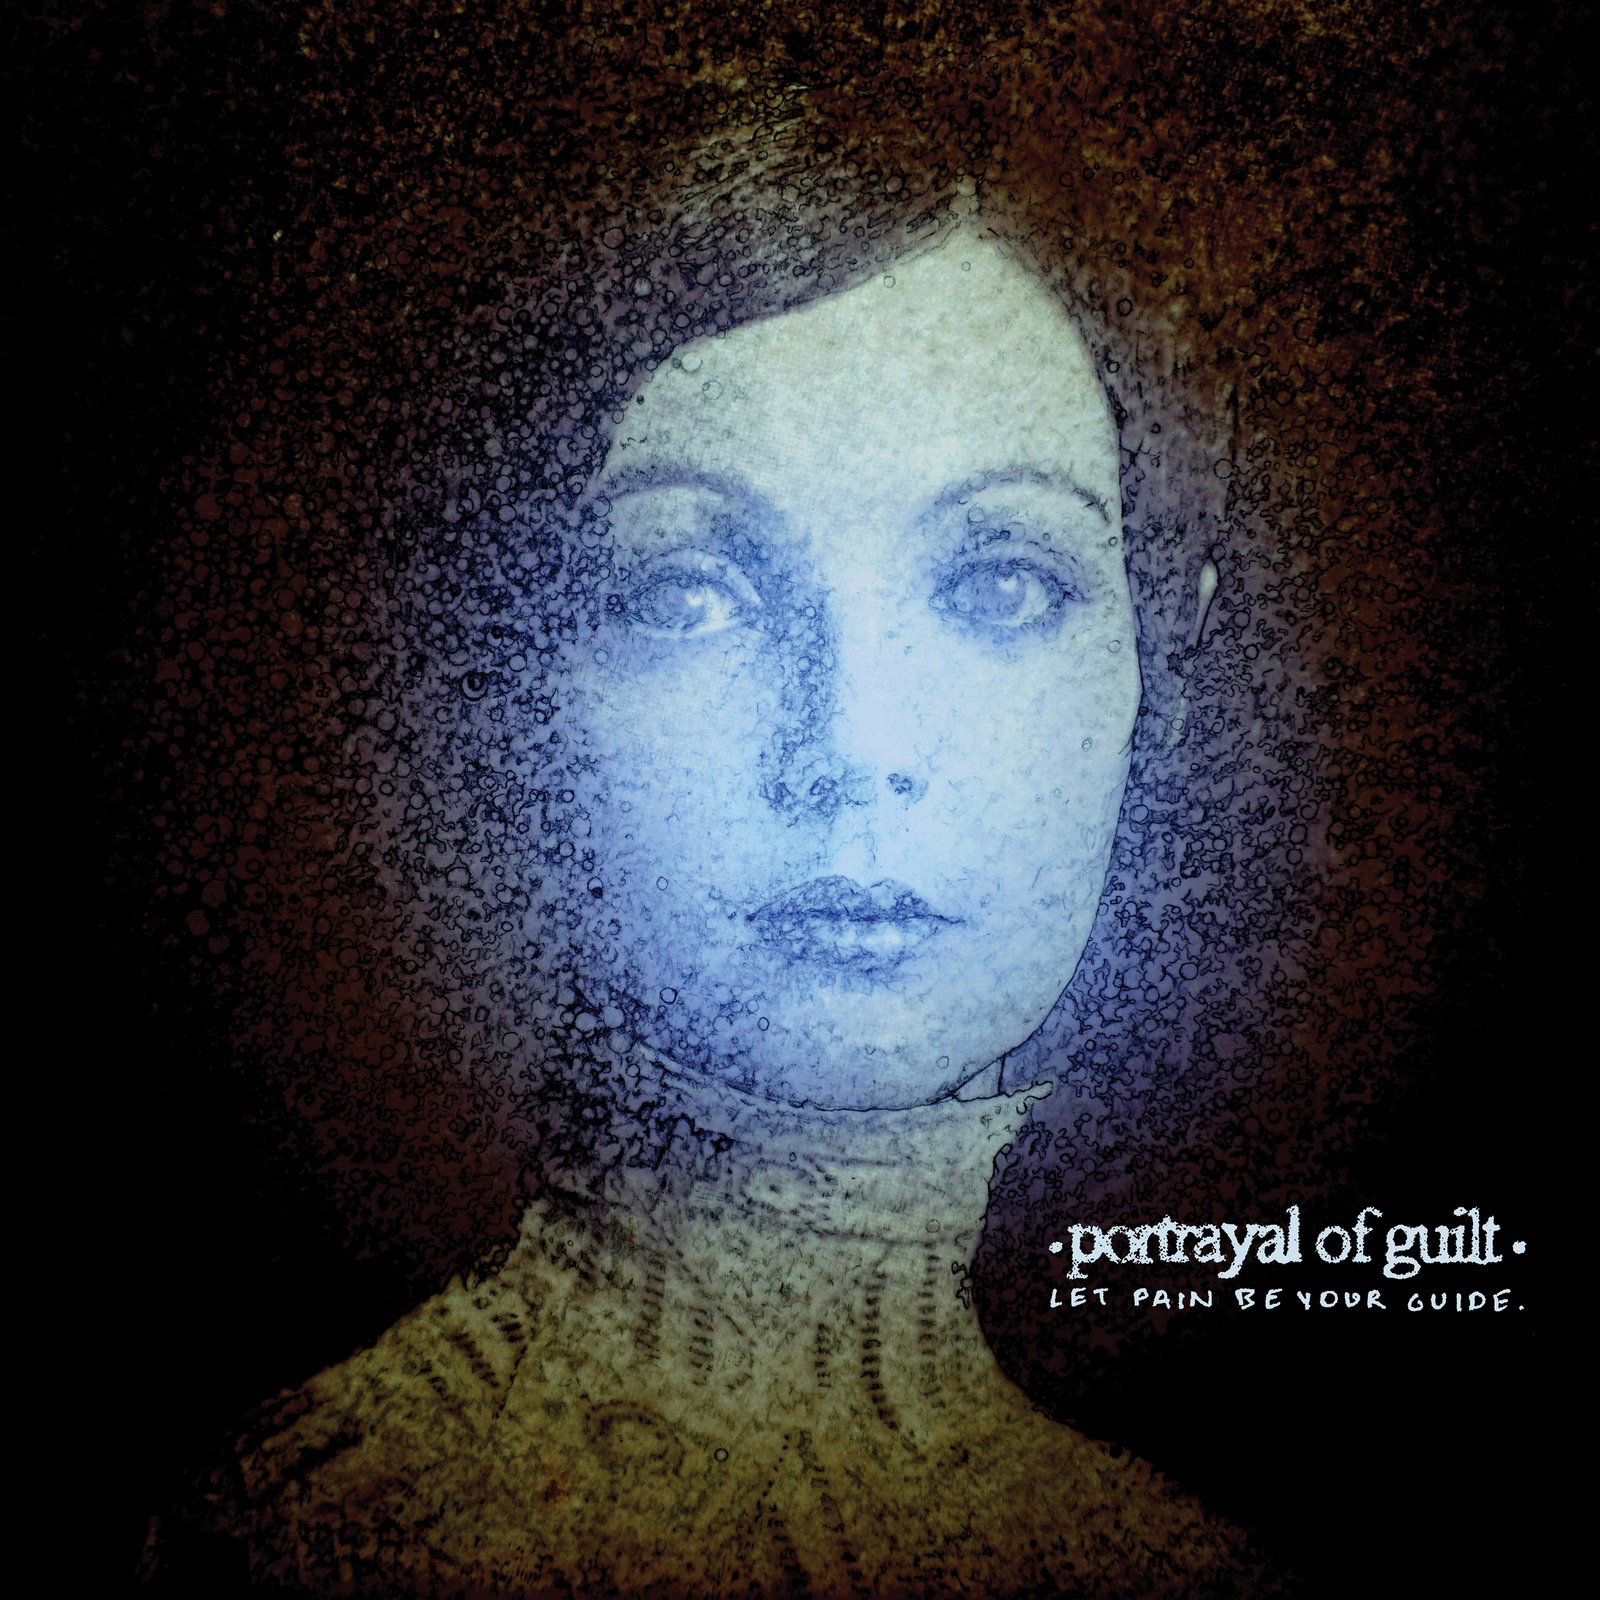 portrayal of guilt – “Let Pain Be Your Guide”